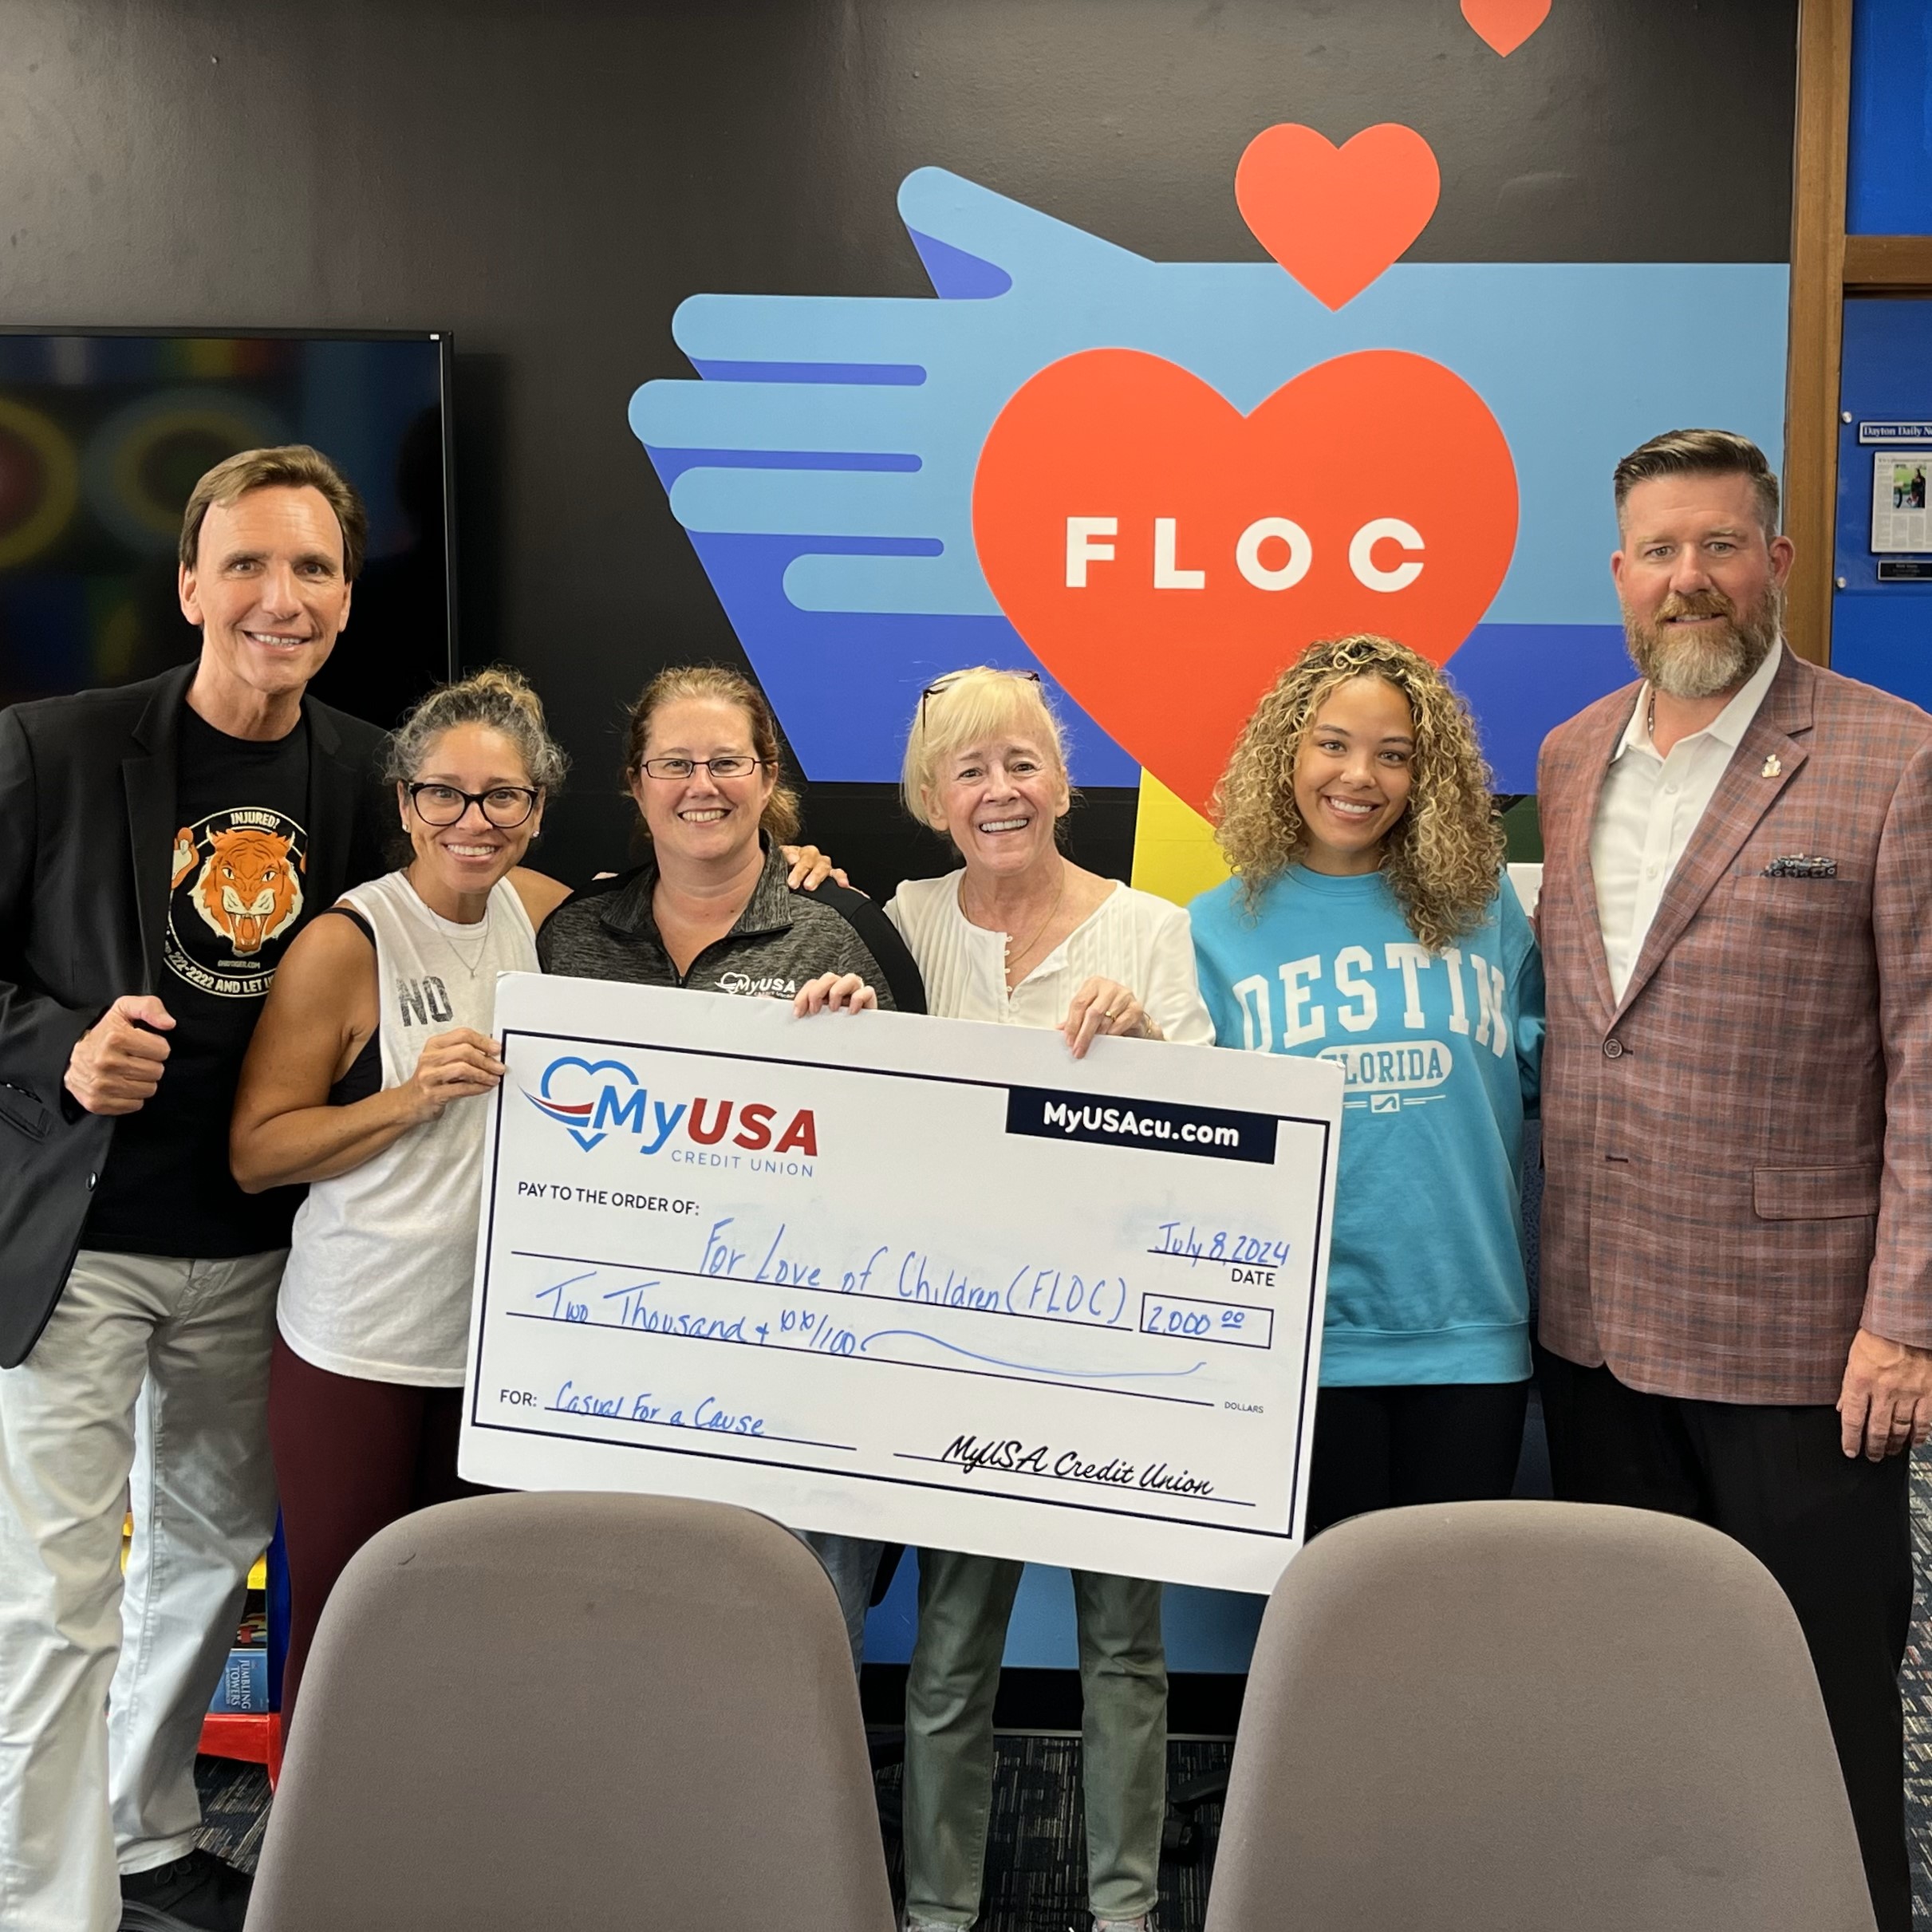 FLOC (For the Love of Children) Check Presentation for Casual for a Cause